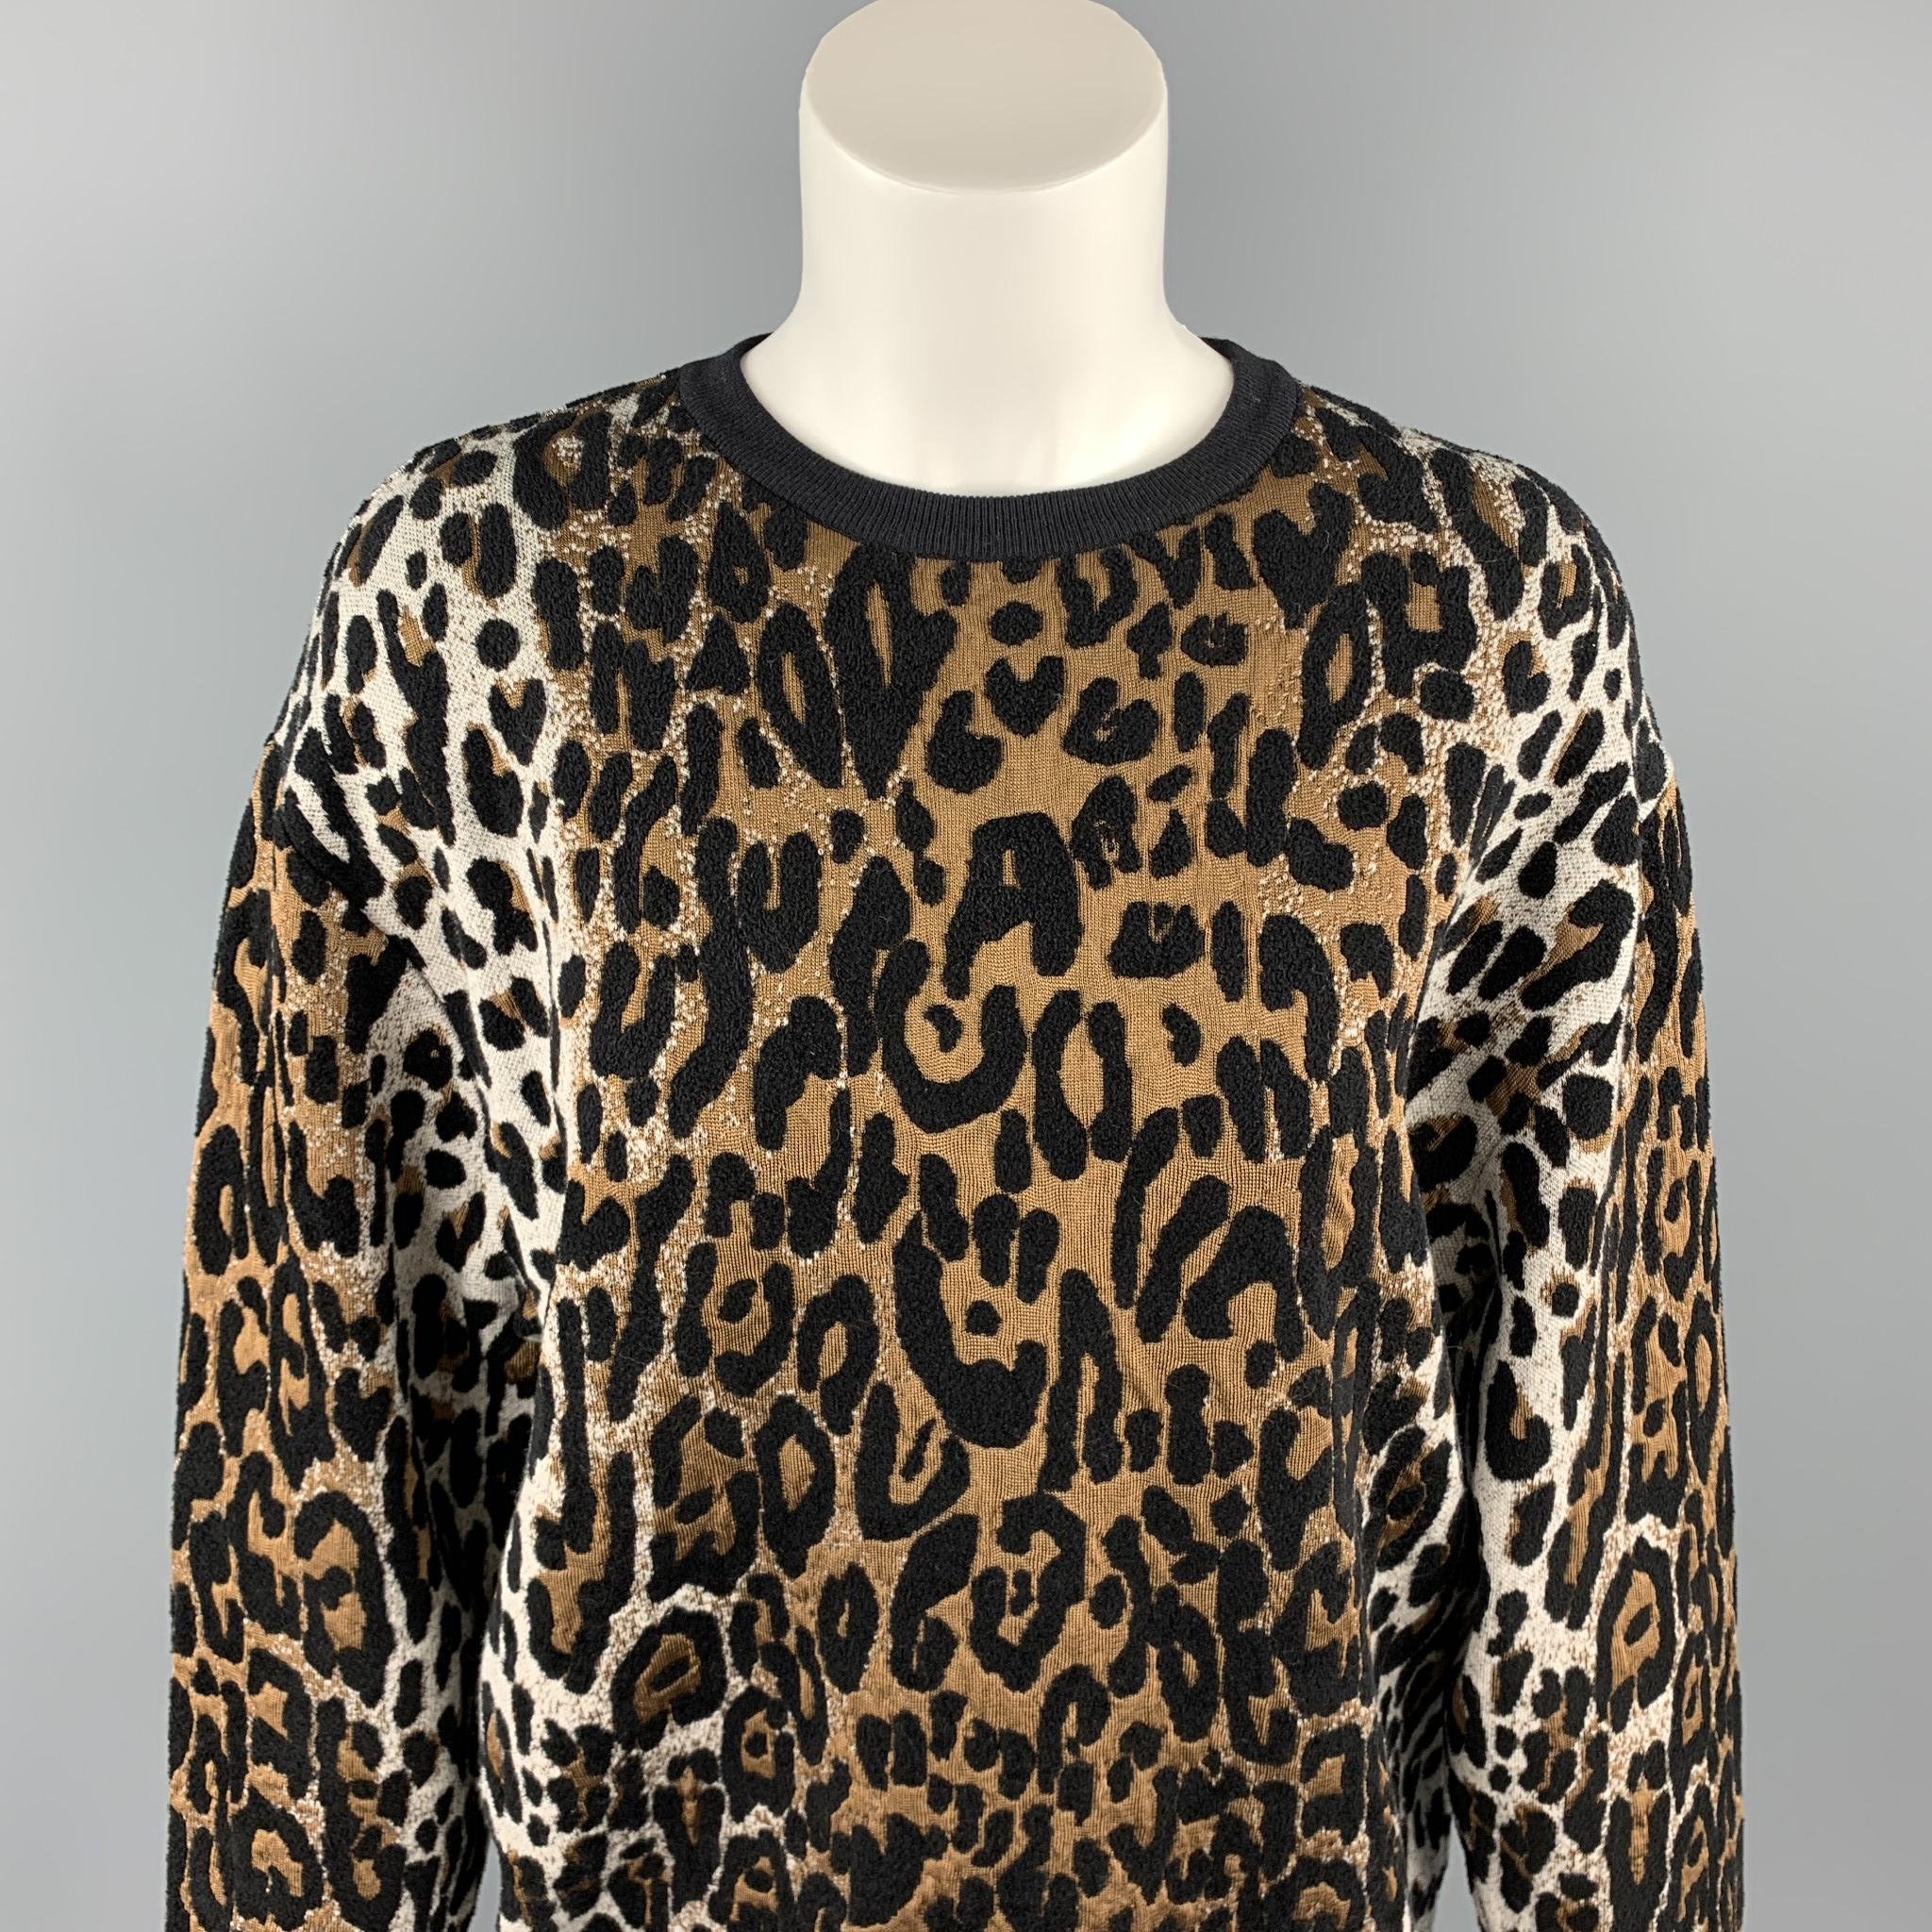 STELLA McCARTNEY pullover comes in a black & tan leopard print viscose blend featuring a crew-neck. Made in Italy.

Excellent Pre-Owned Condition.
Marked: IT 40

Measurements:

Shoulder: 20 in. 
Bust: 42 in. 
Sleeve: 23 in. 
Length: 27 in. 